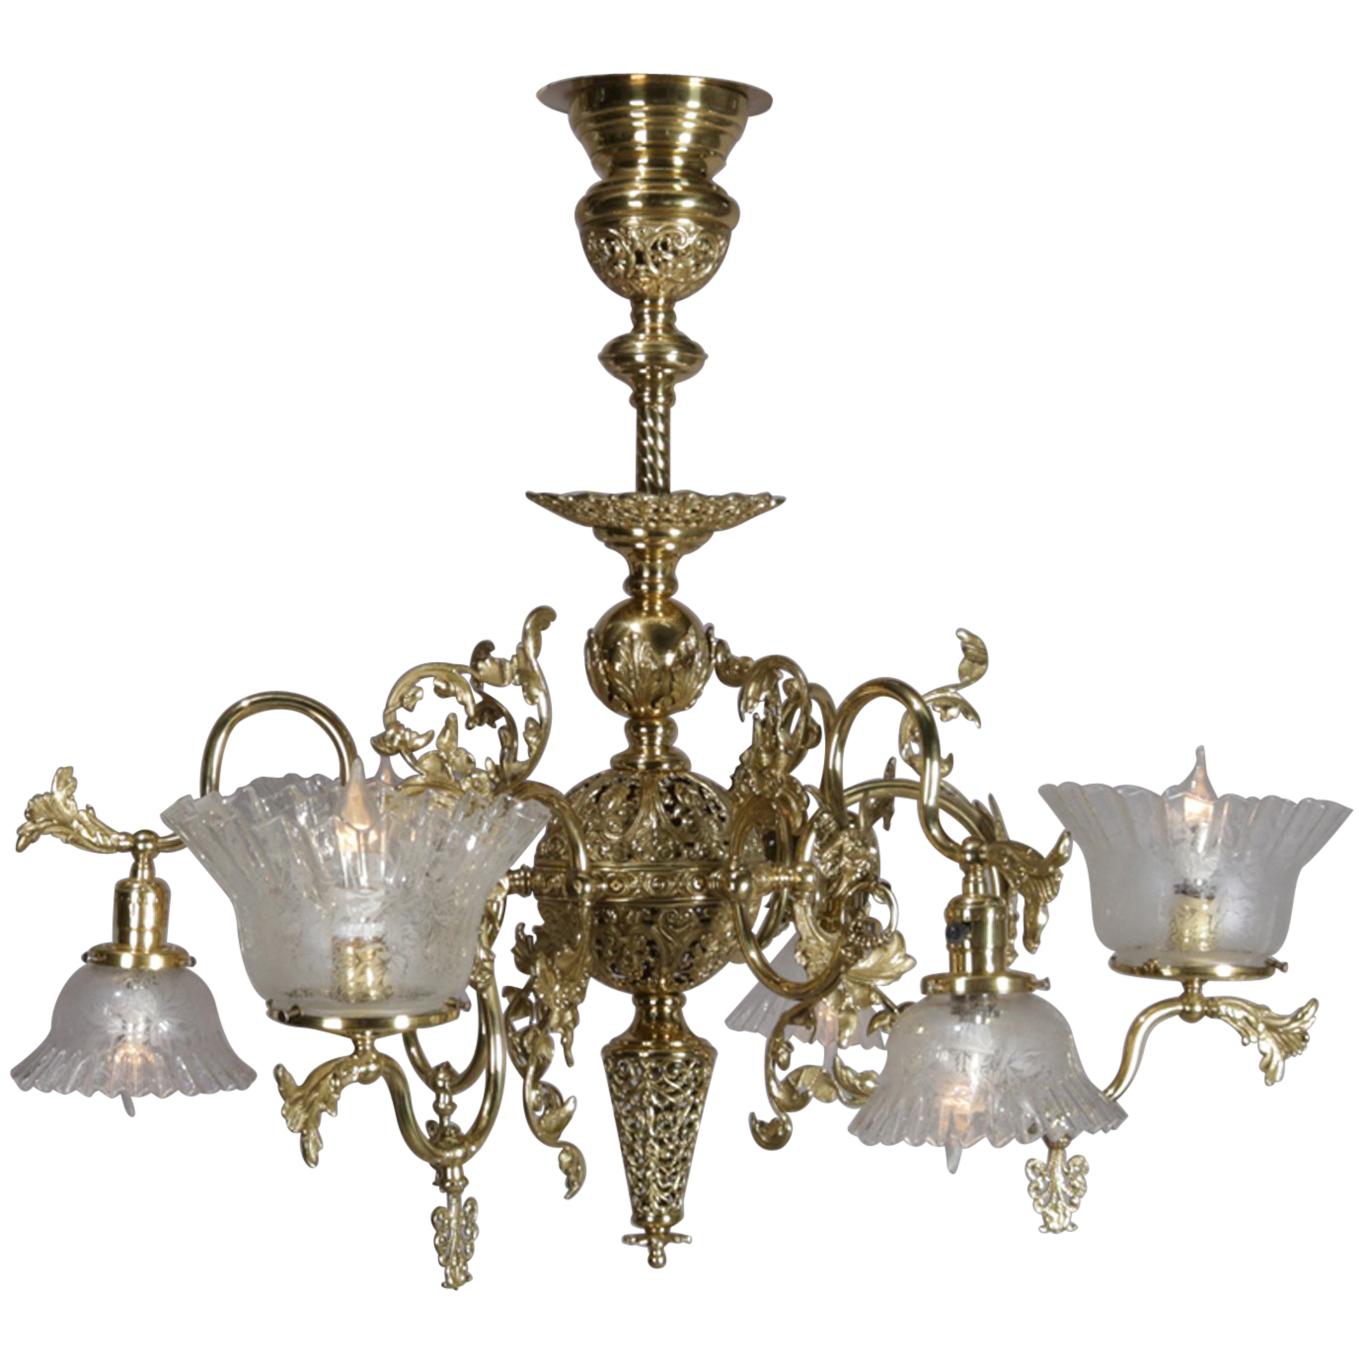 Cornelius School Gilt and Pierced White Metal Up and Down Six-Light Chandelier